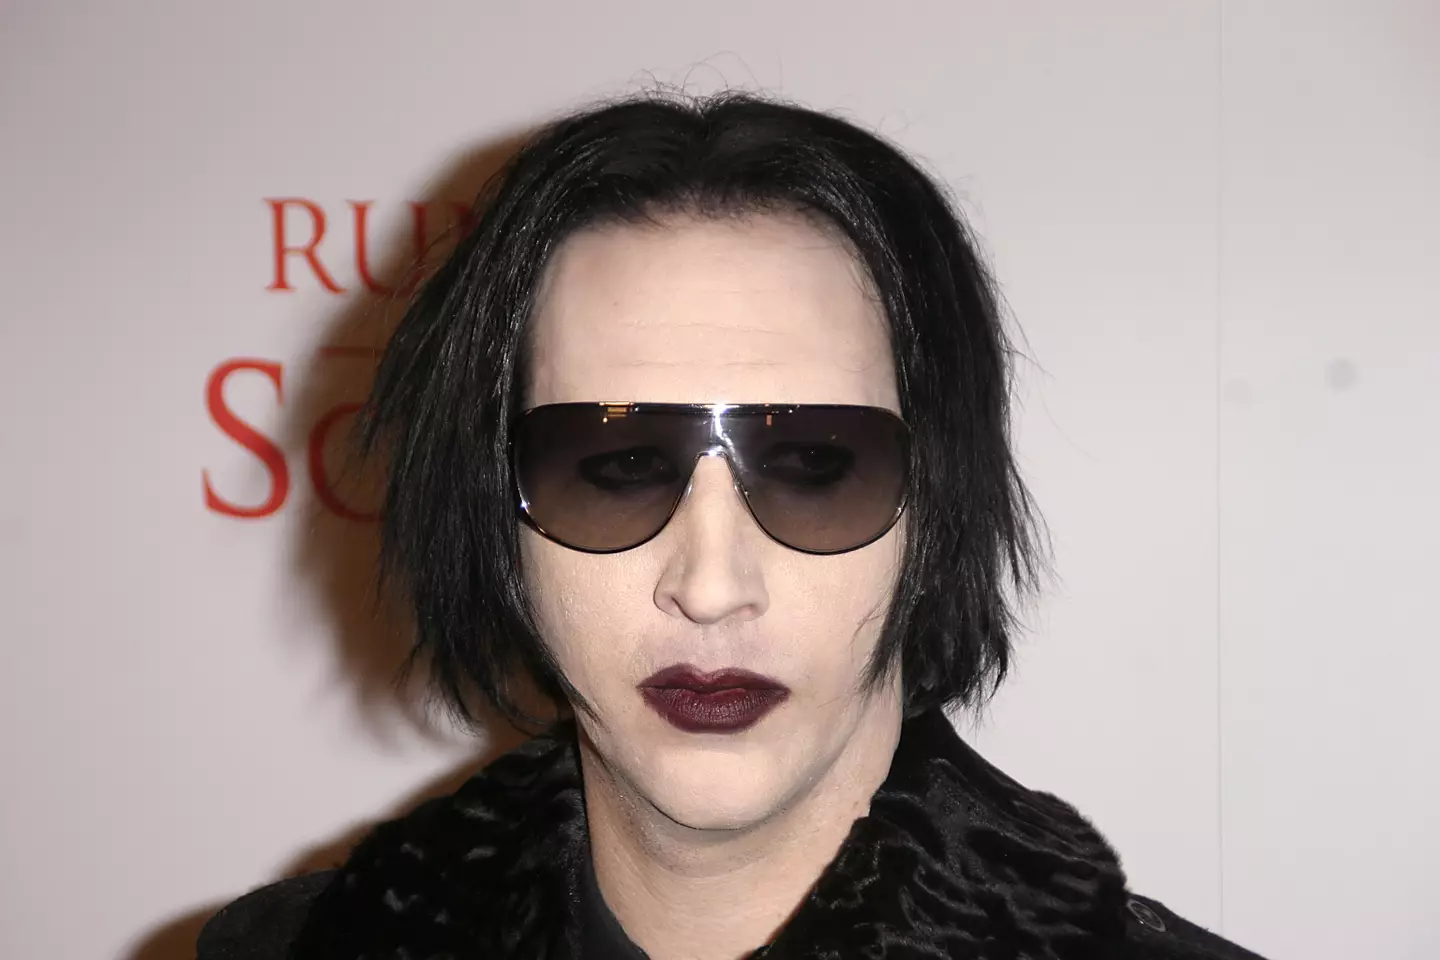 It looks like the rumour isn't true, according to Manson anyway.